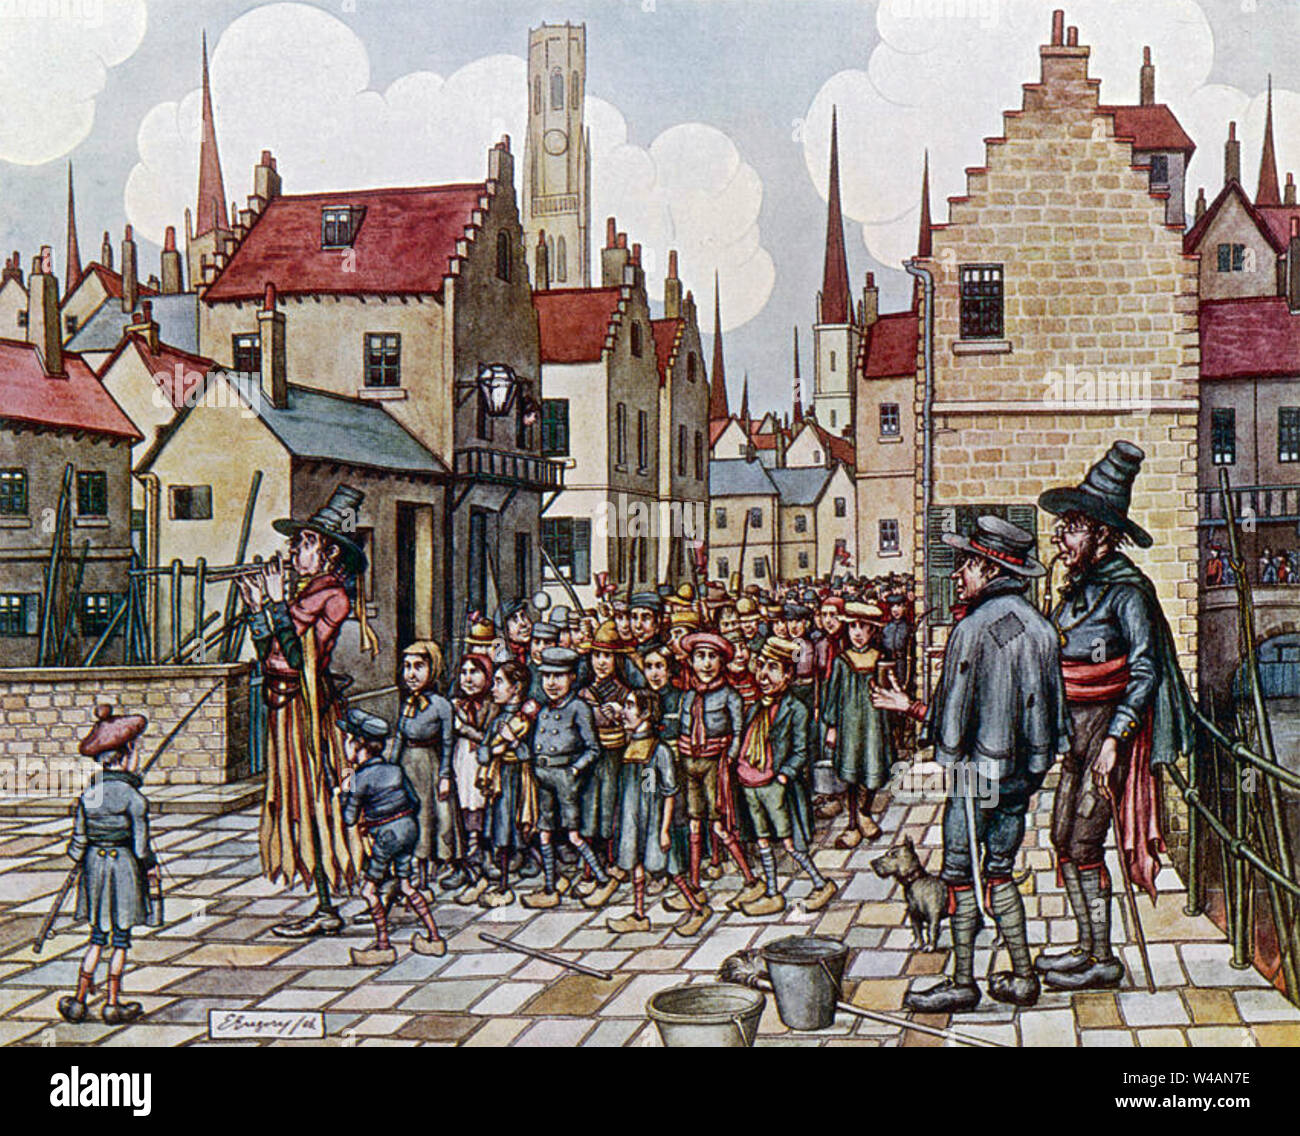 https://c8.alamy.com/comp/W4AN7E/pied-piper-of-hamelin-early-medieval-german-legend-in-a-W4AN7E.jpg